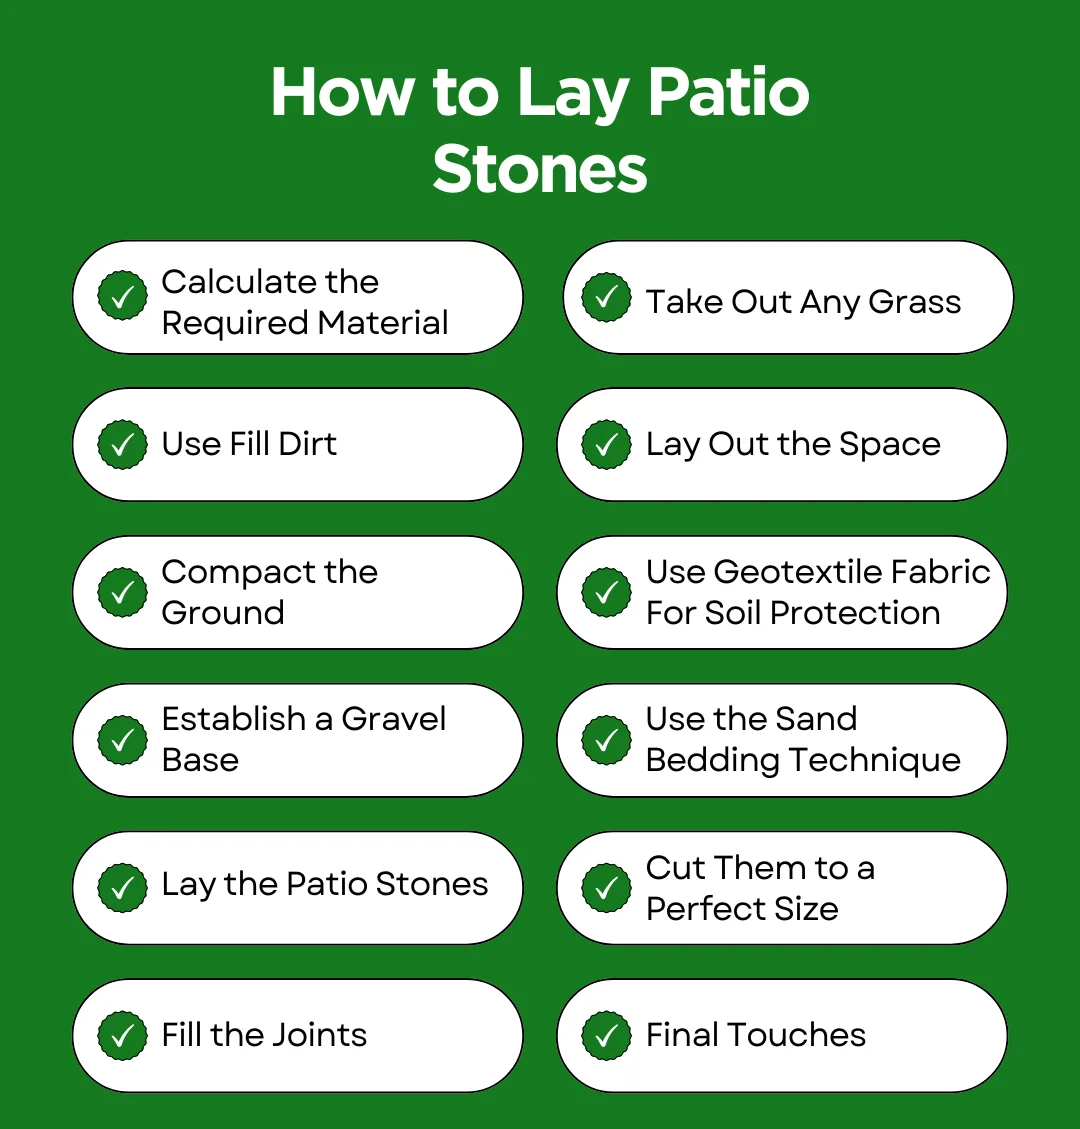 An infographic explaining how to lay patio stones